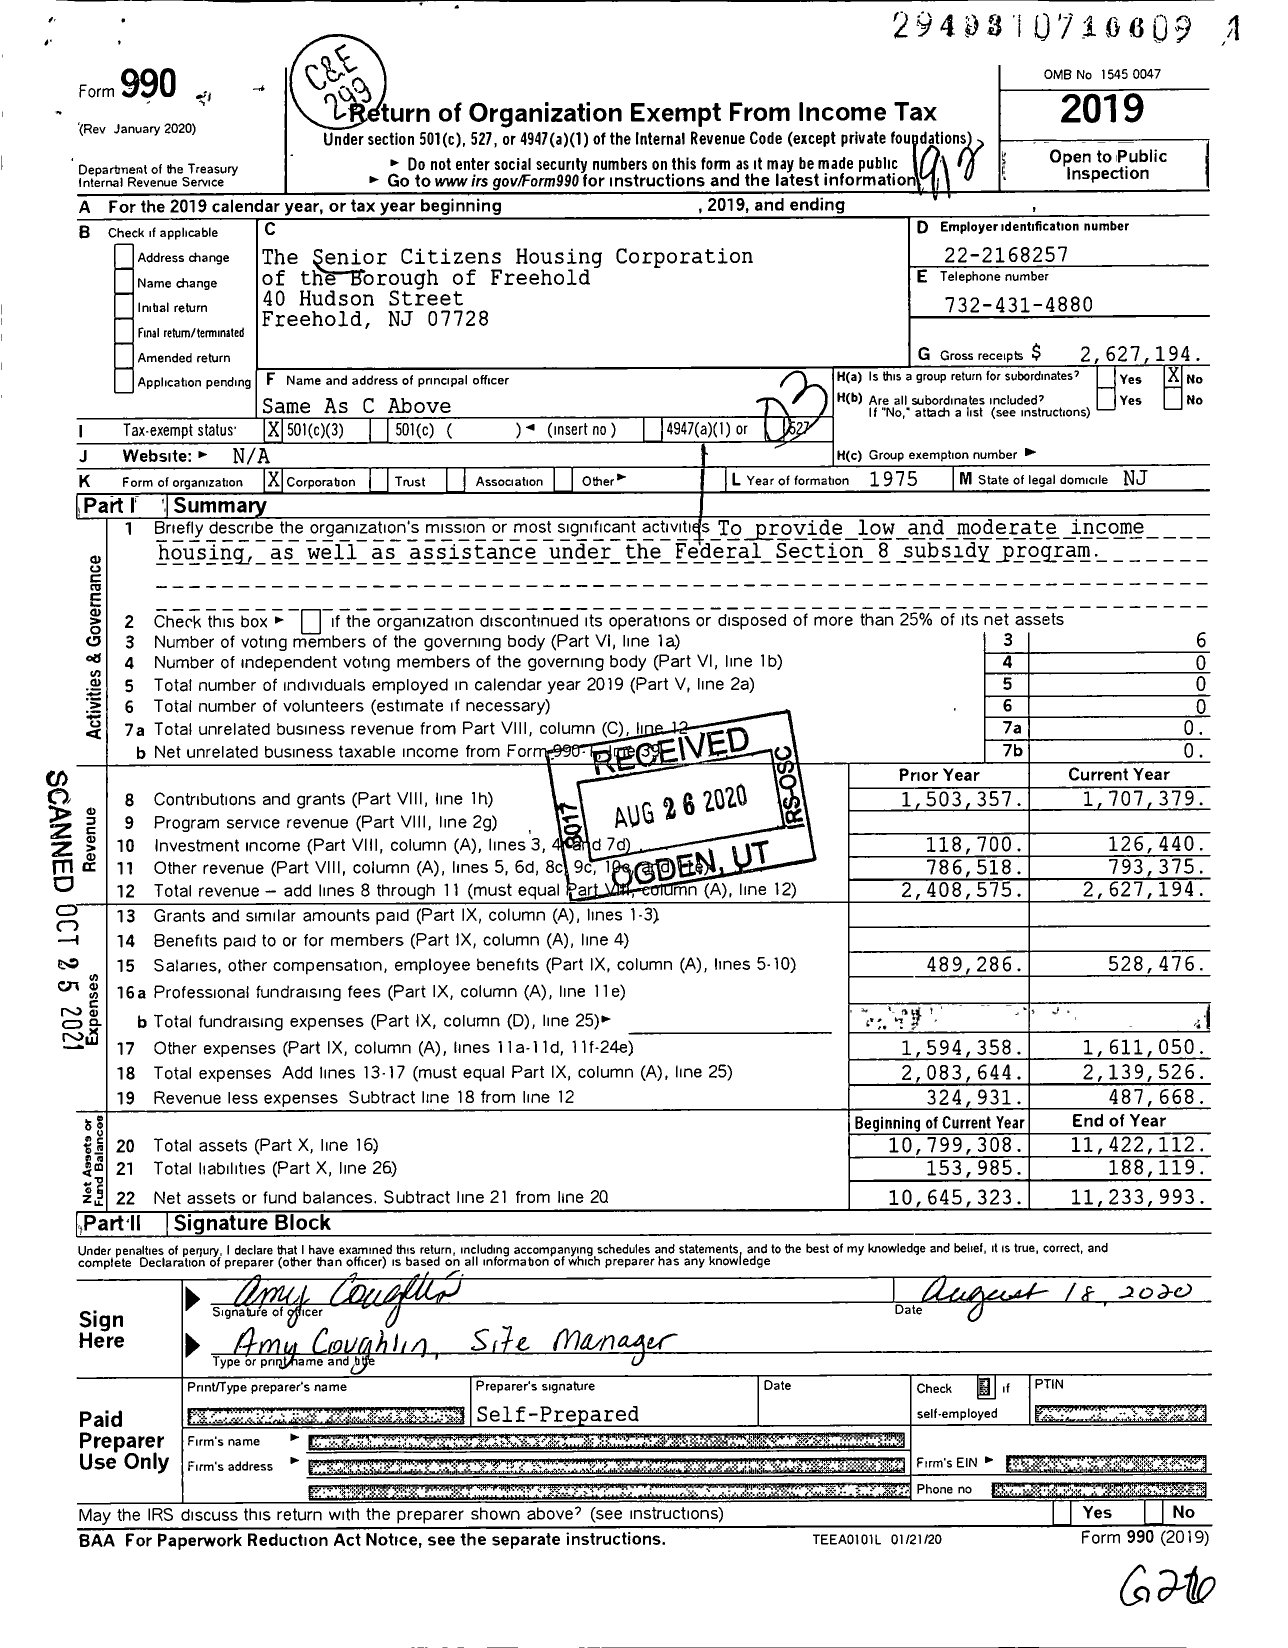 Image of first page of 2019 Form 990 for Senior Citizens Housing Corporation of the Borough of Freehold